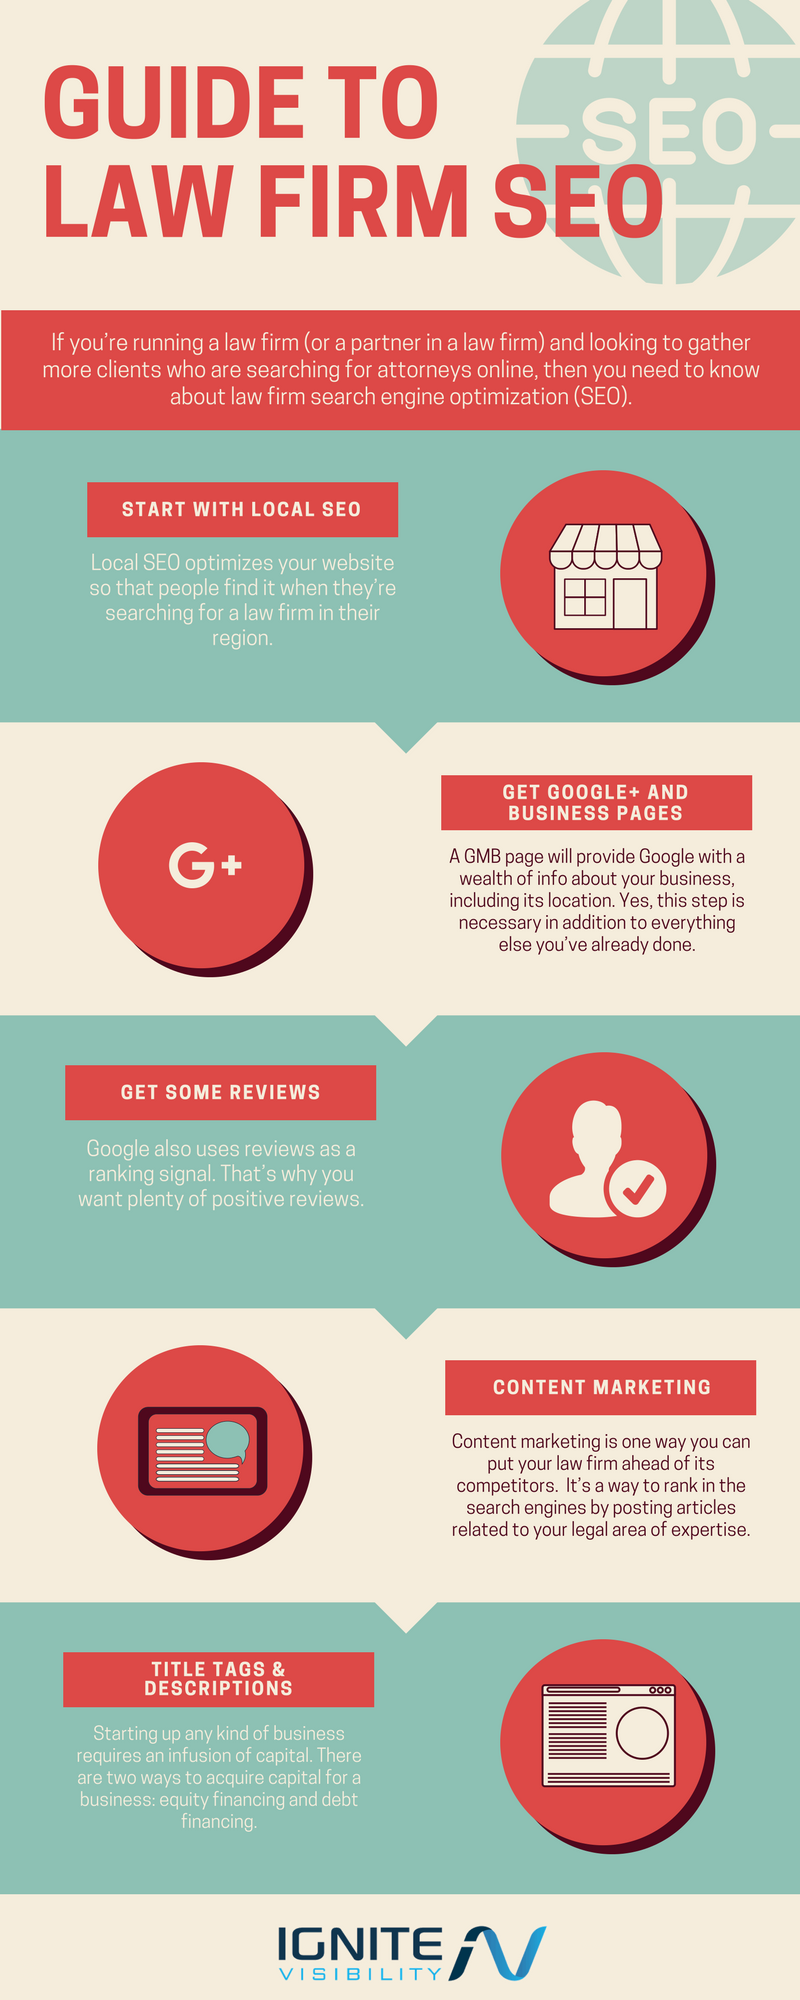 Guide to Law Firm SEO